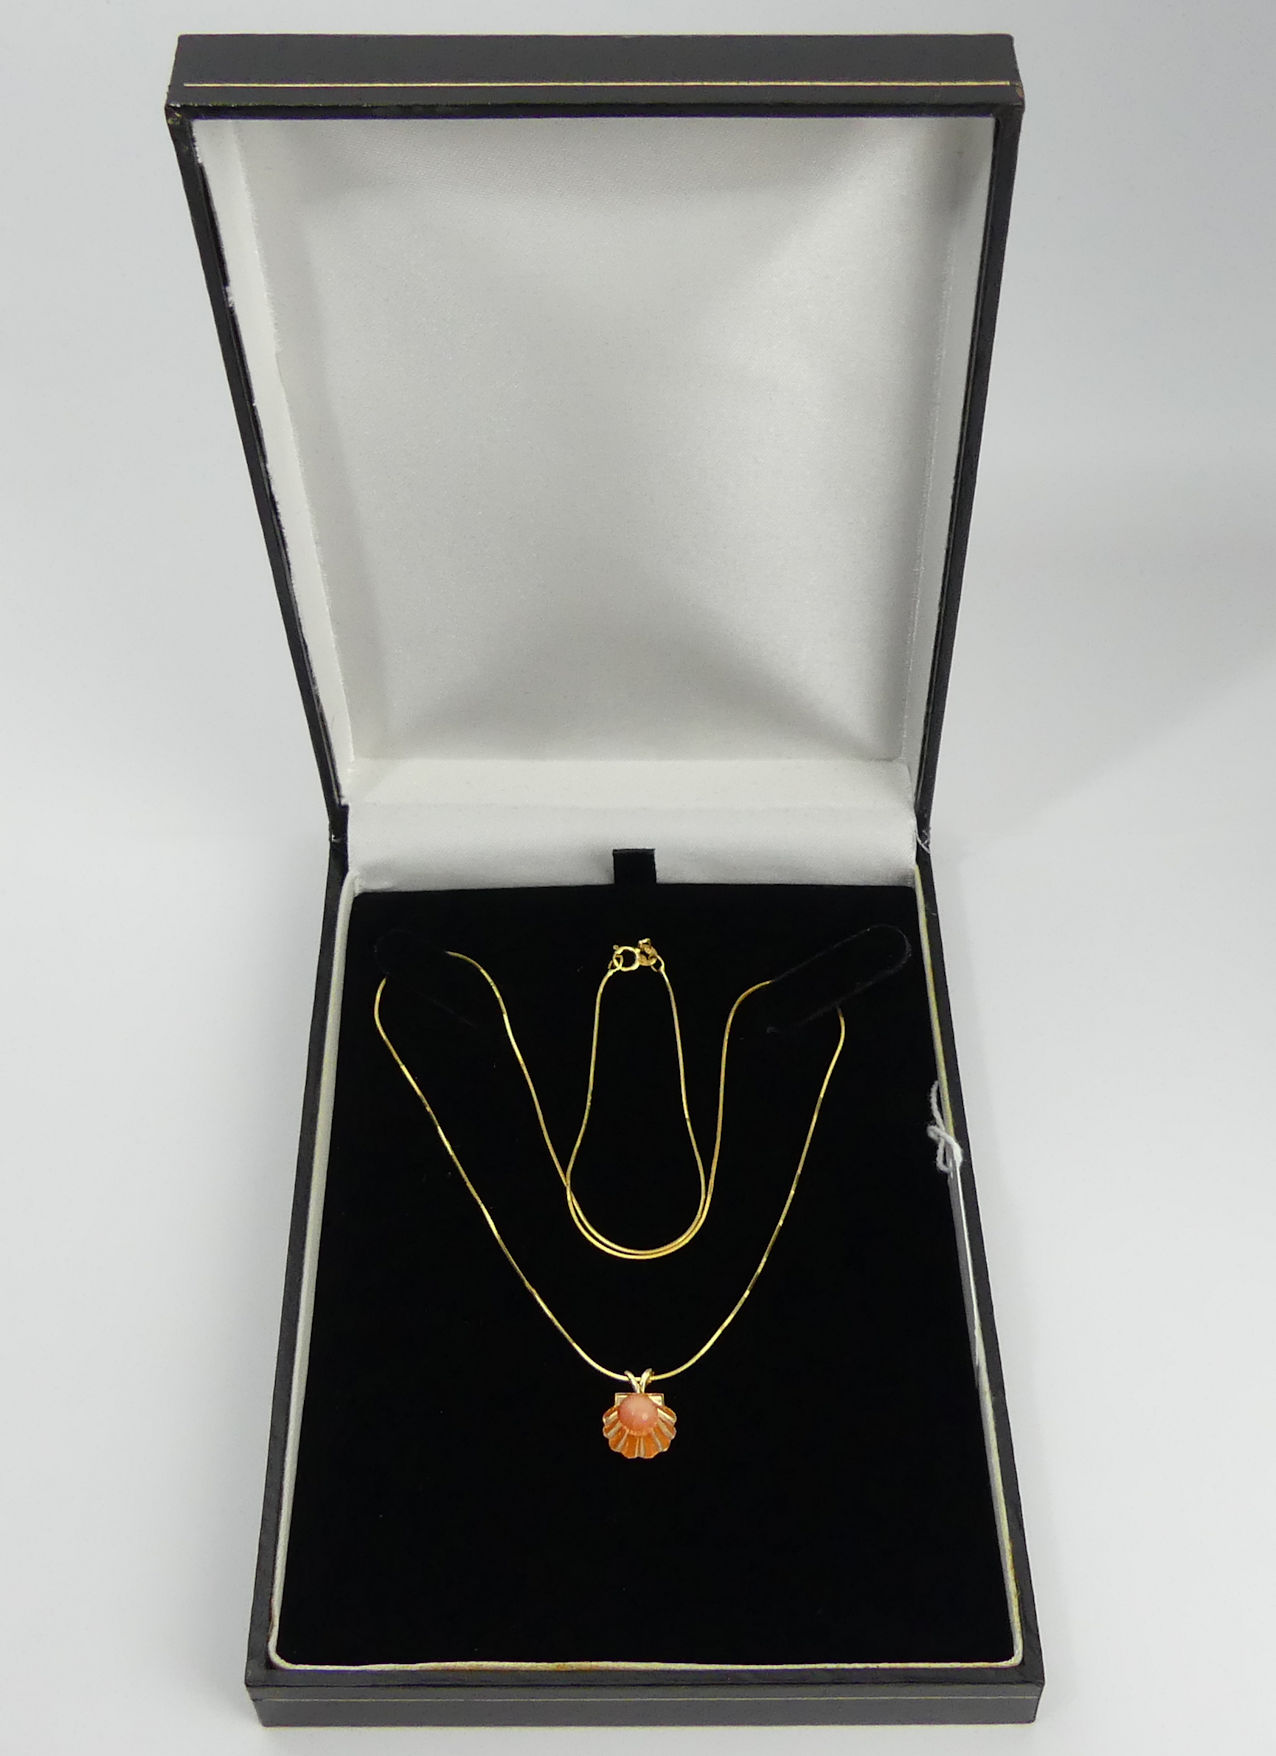 14ct gold coral pendant and chain, 2.4 grams. UK Postage £12.